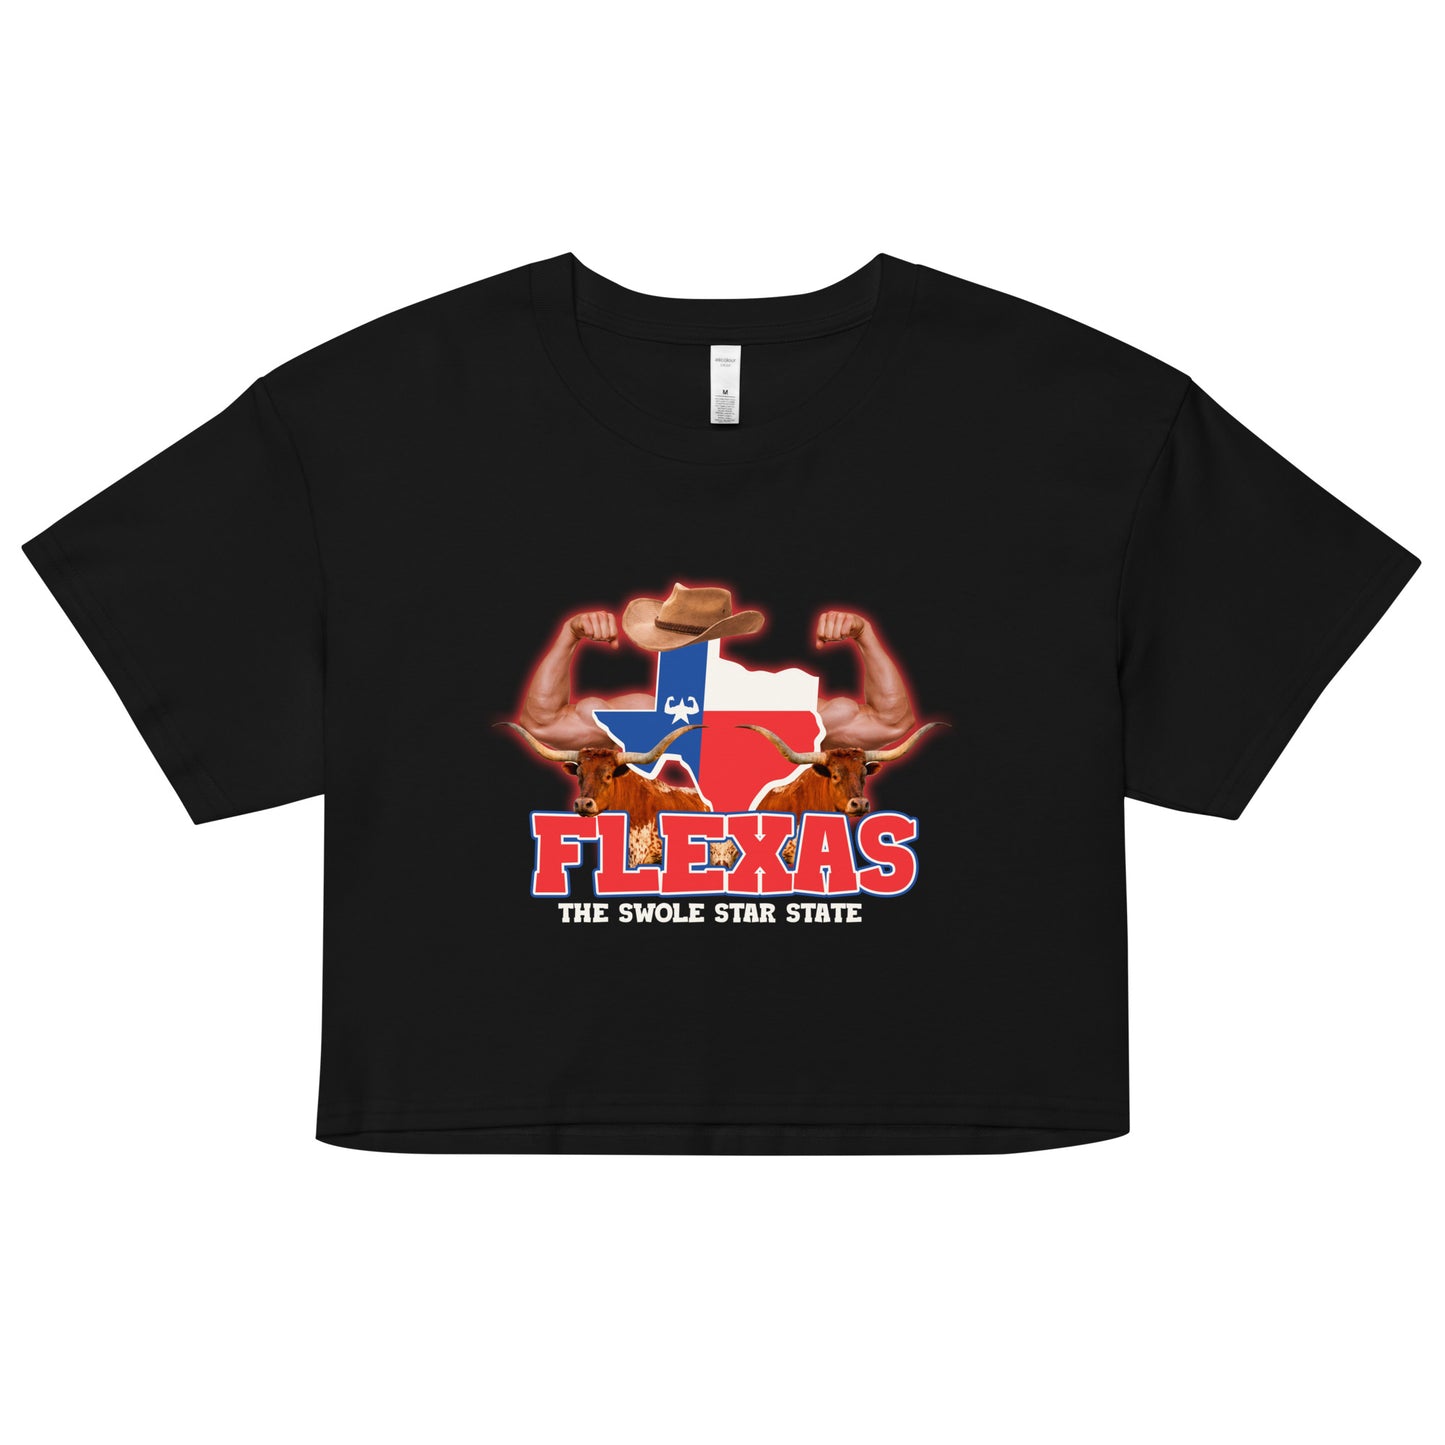 Flexas (The Swole Star State) crop top